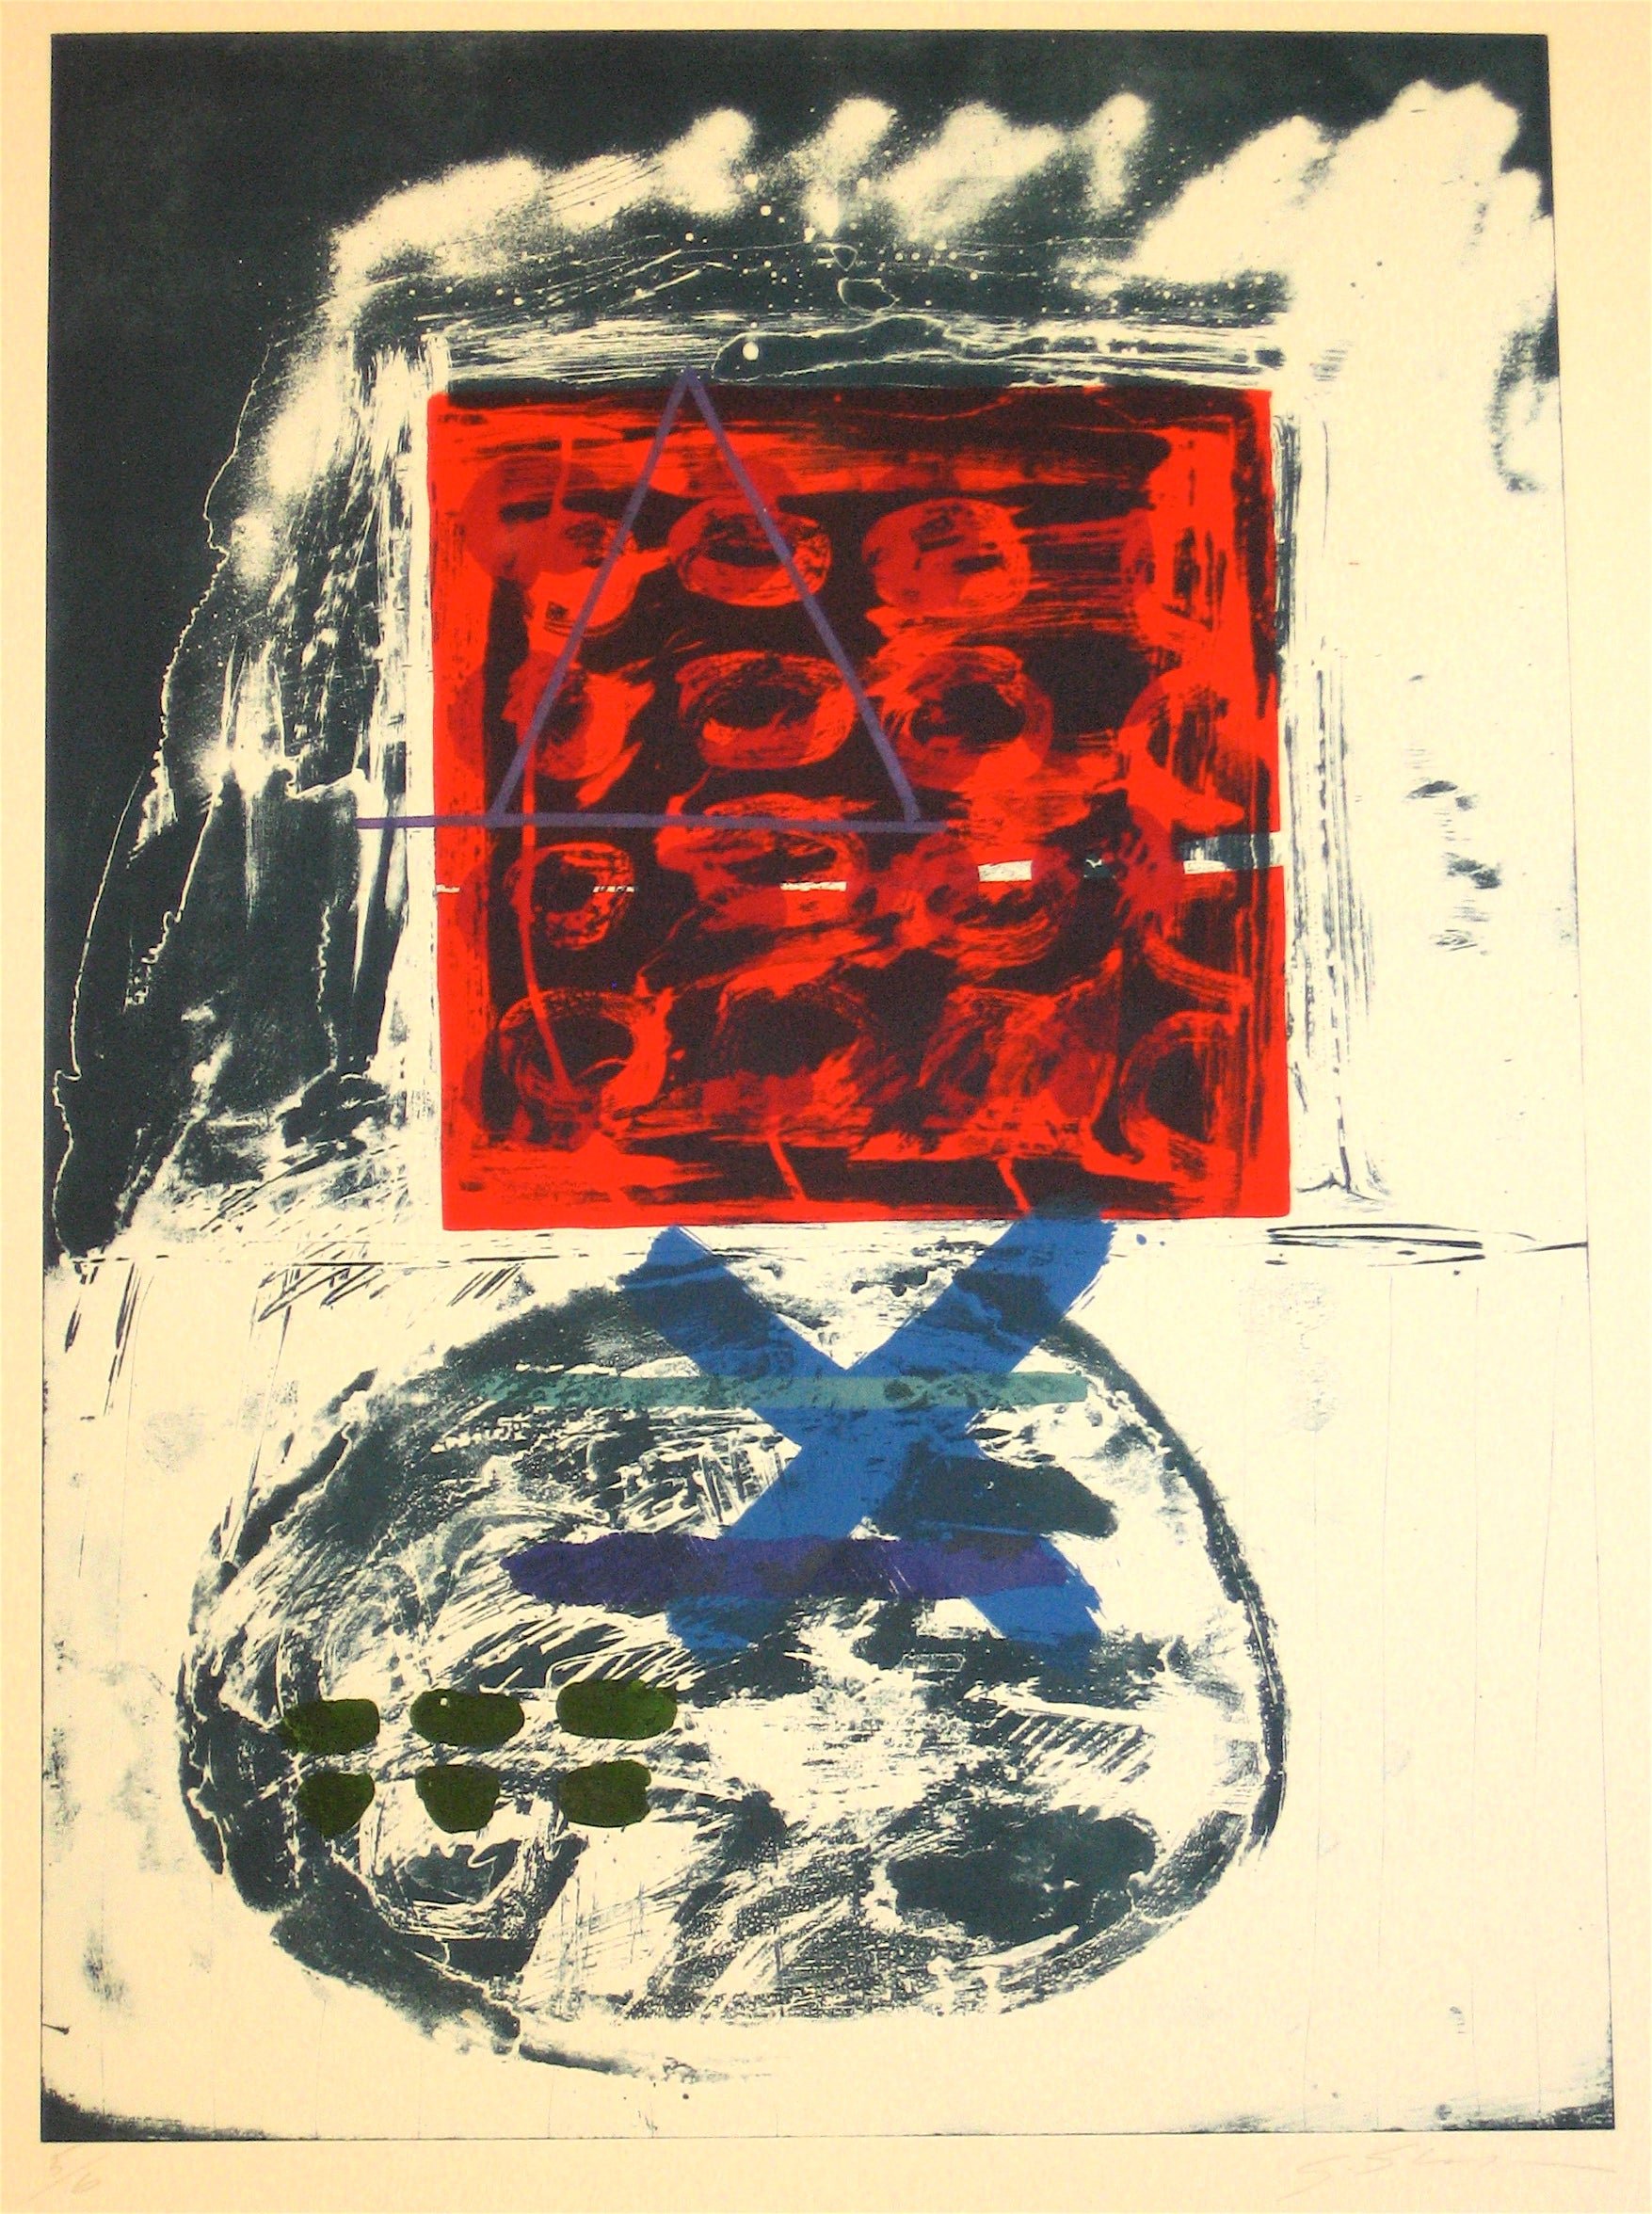 Abstract Expressionist 1966 Dark Red & Blue Stone Lithograph <br><br>#11968